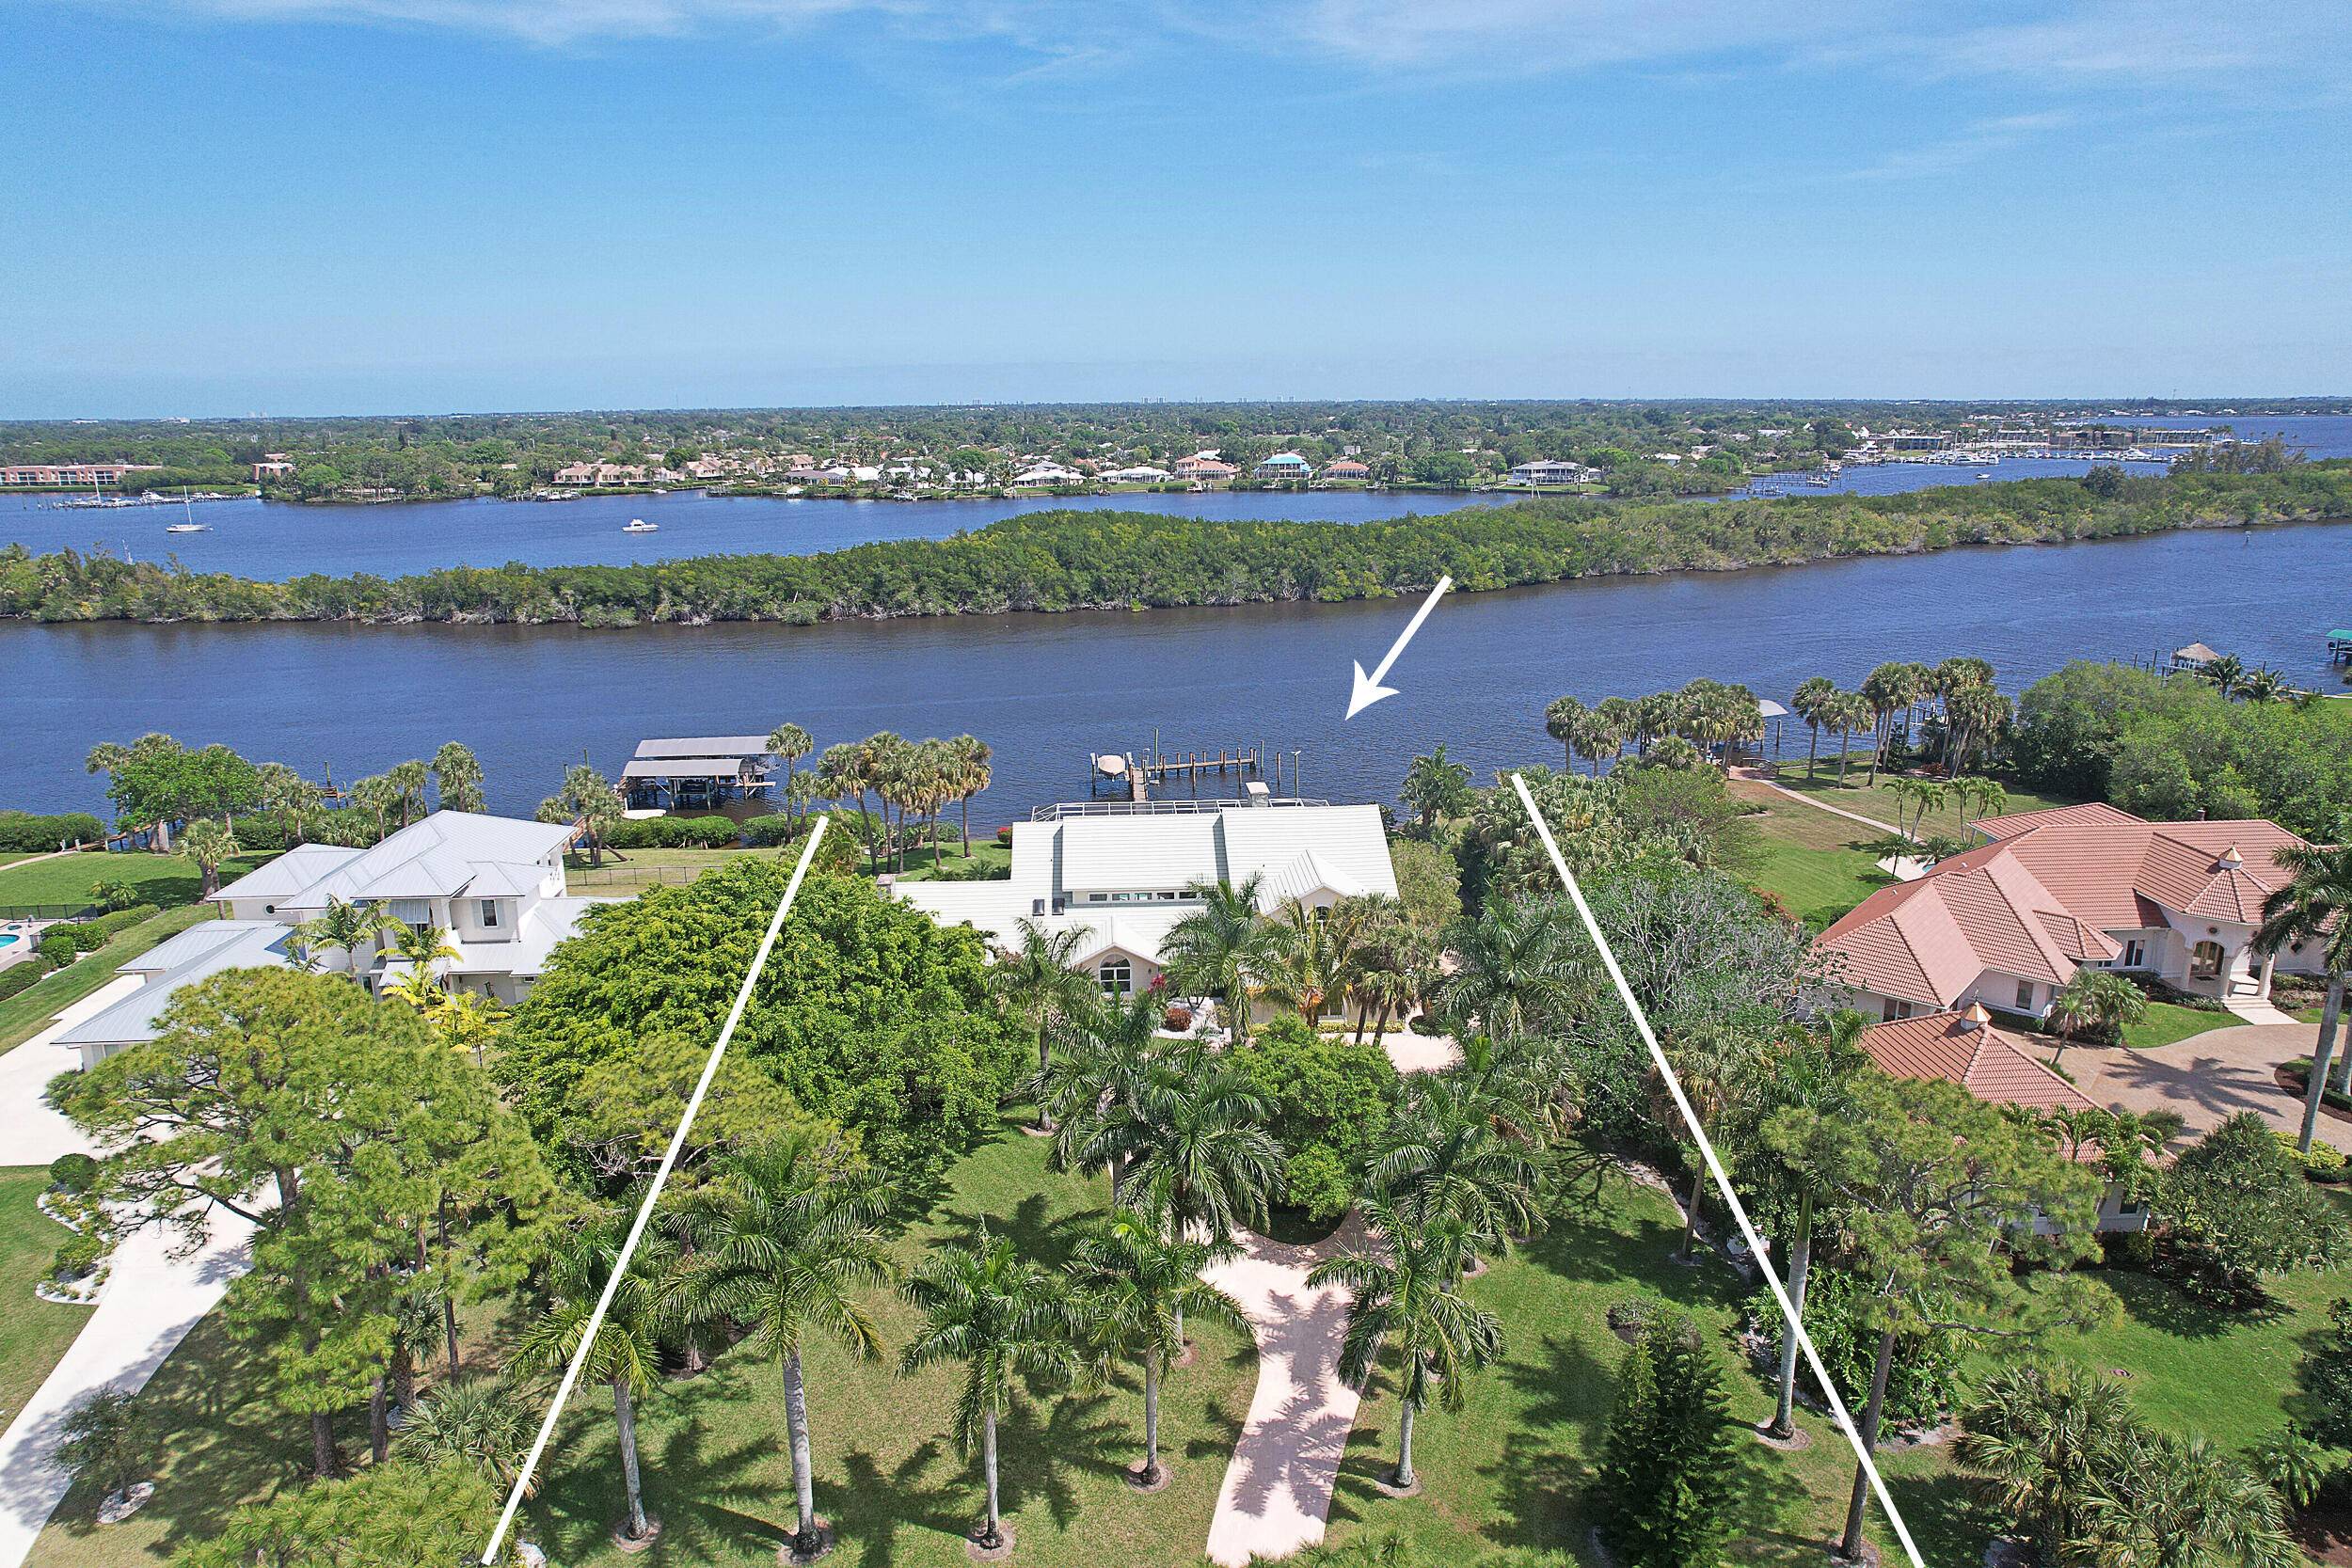 Find your custom built waterfront home here with 150ft on the river sweeping views of the North Fork in beautiful Bay St Lucie !